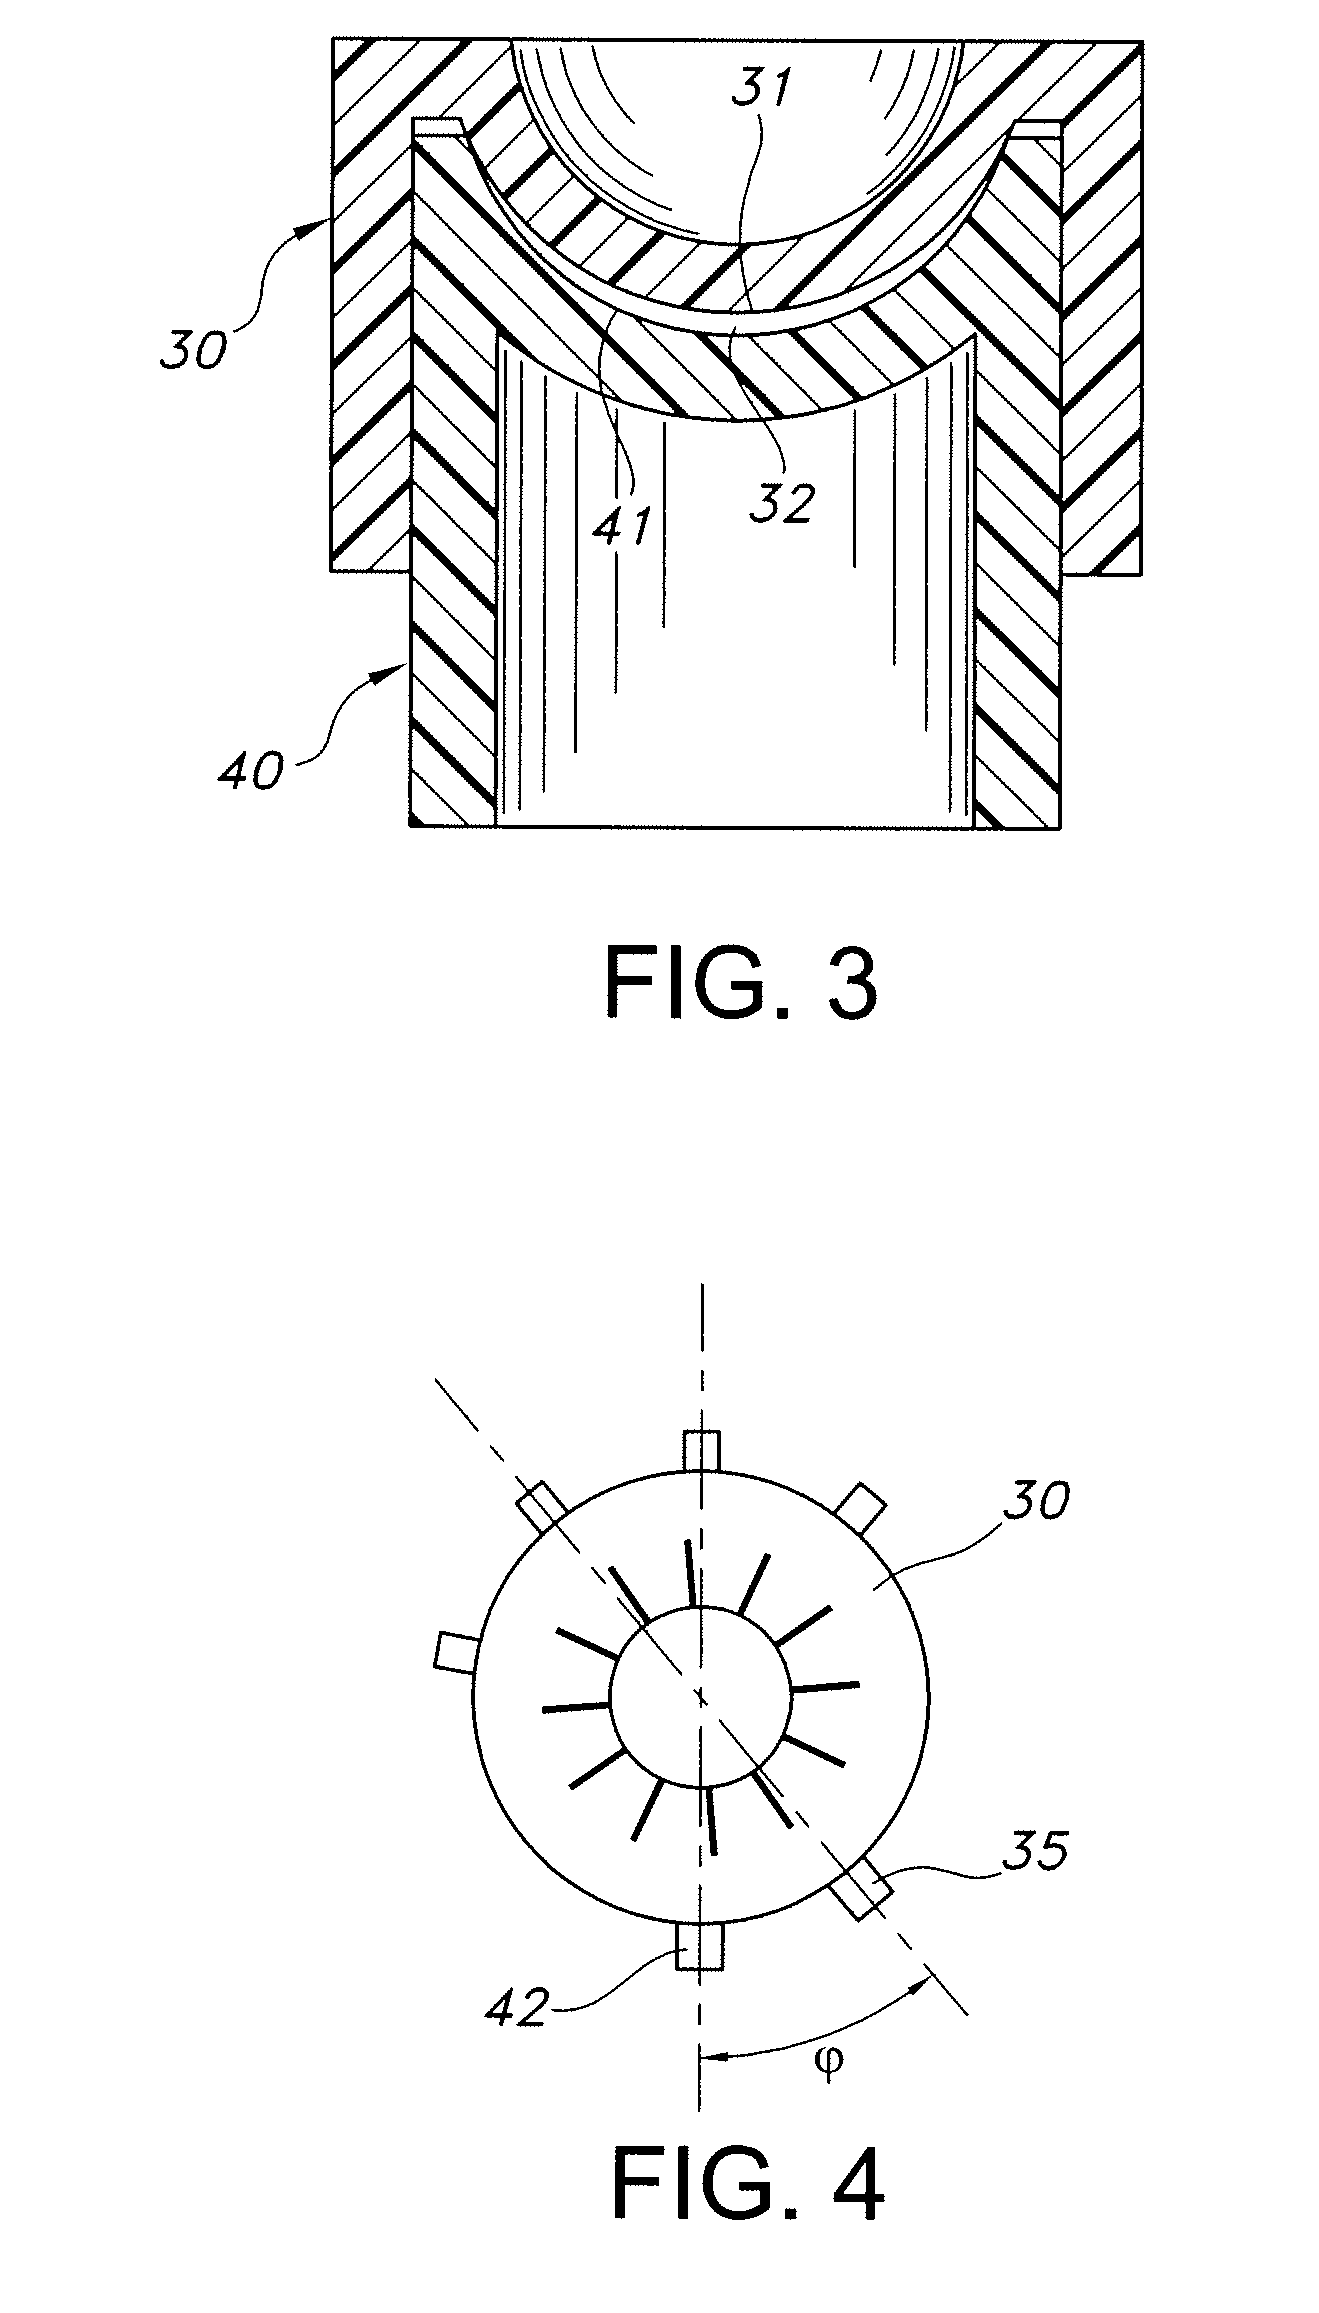 Method and System of Measuring Toric Lens Axis Angle